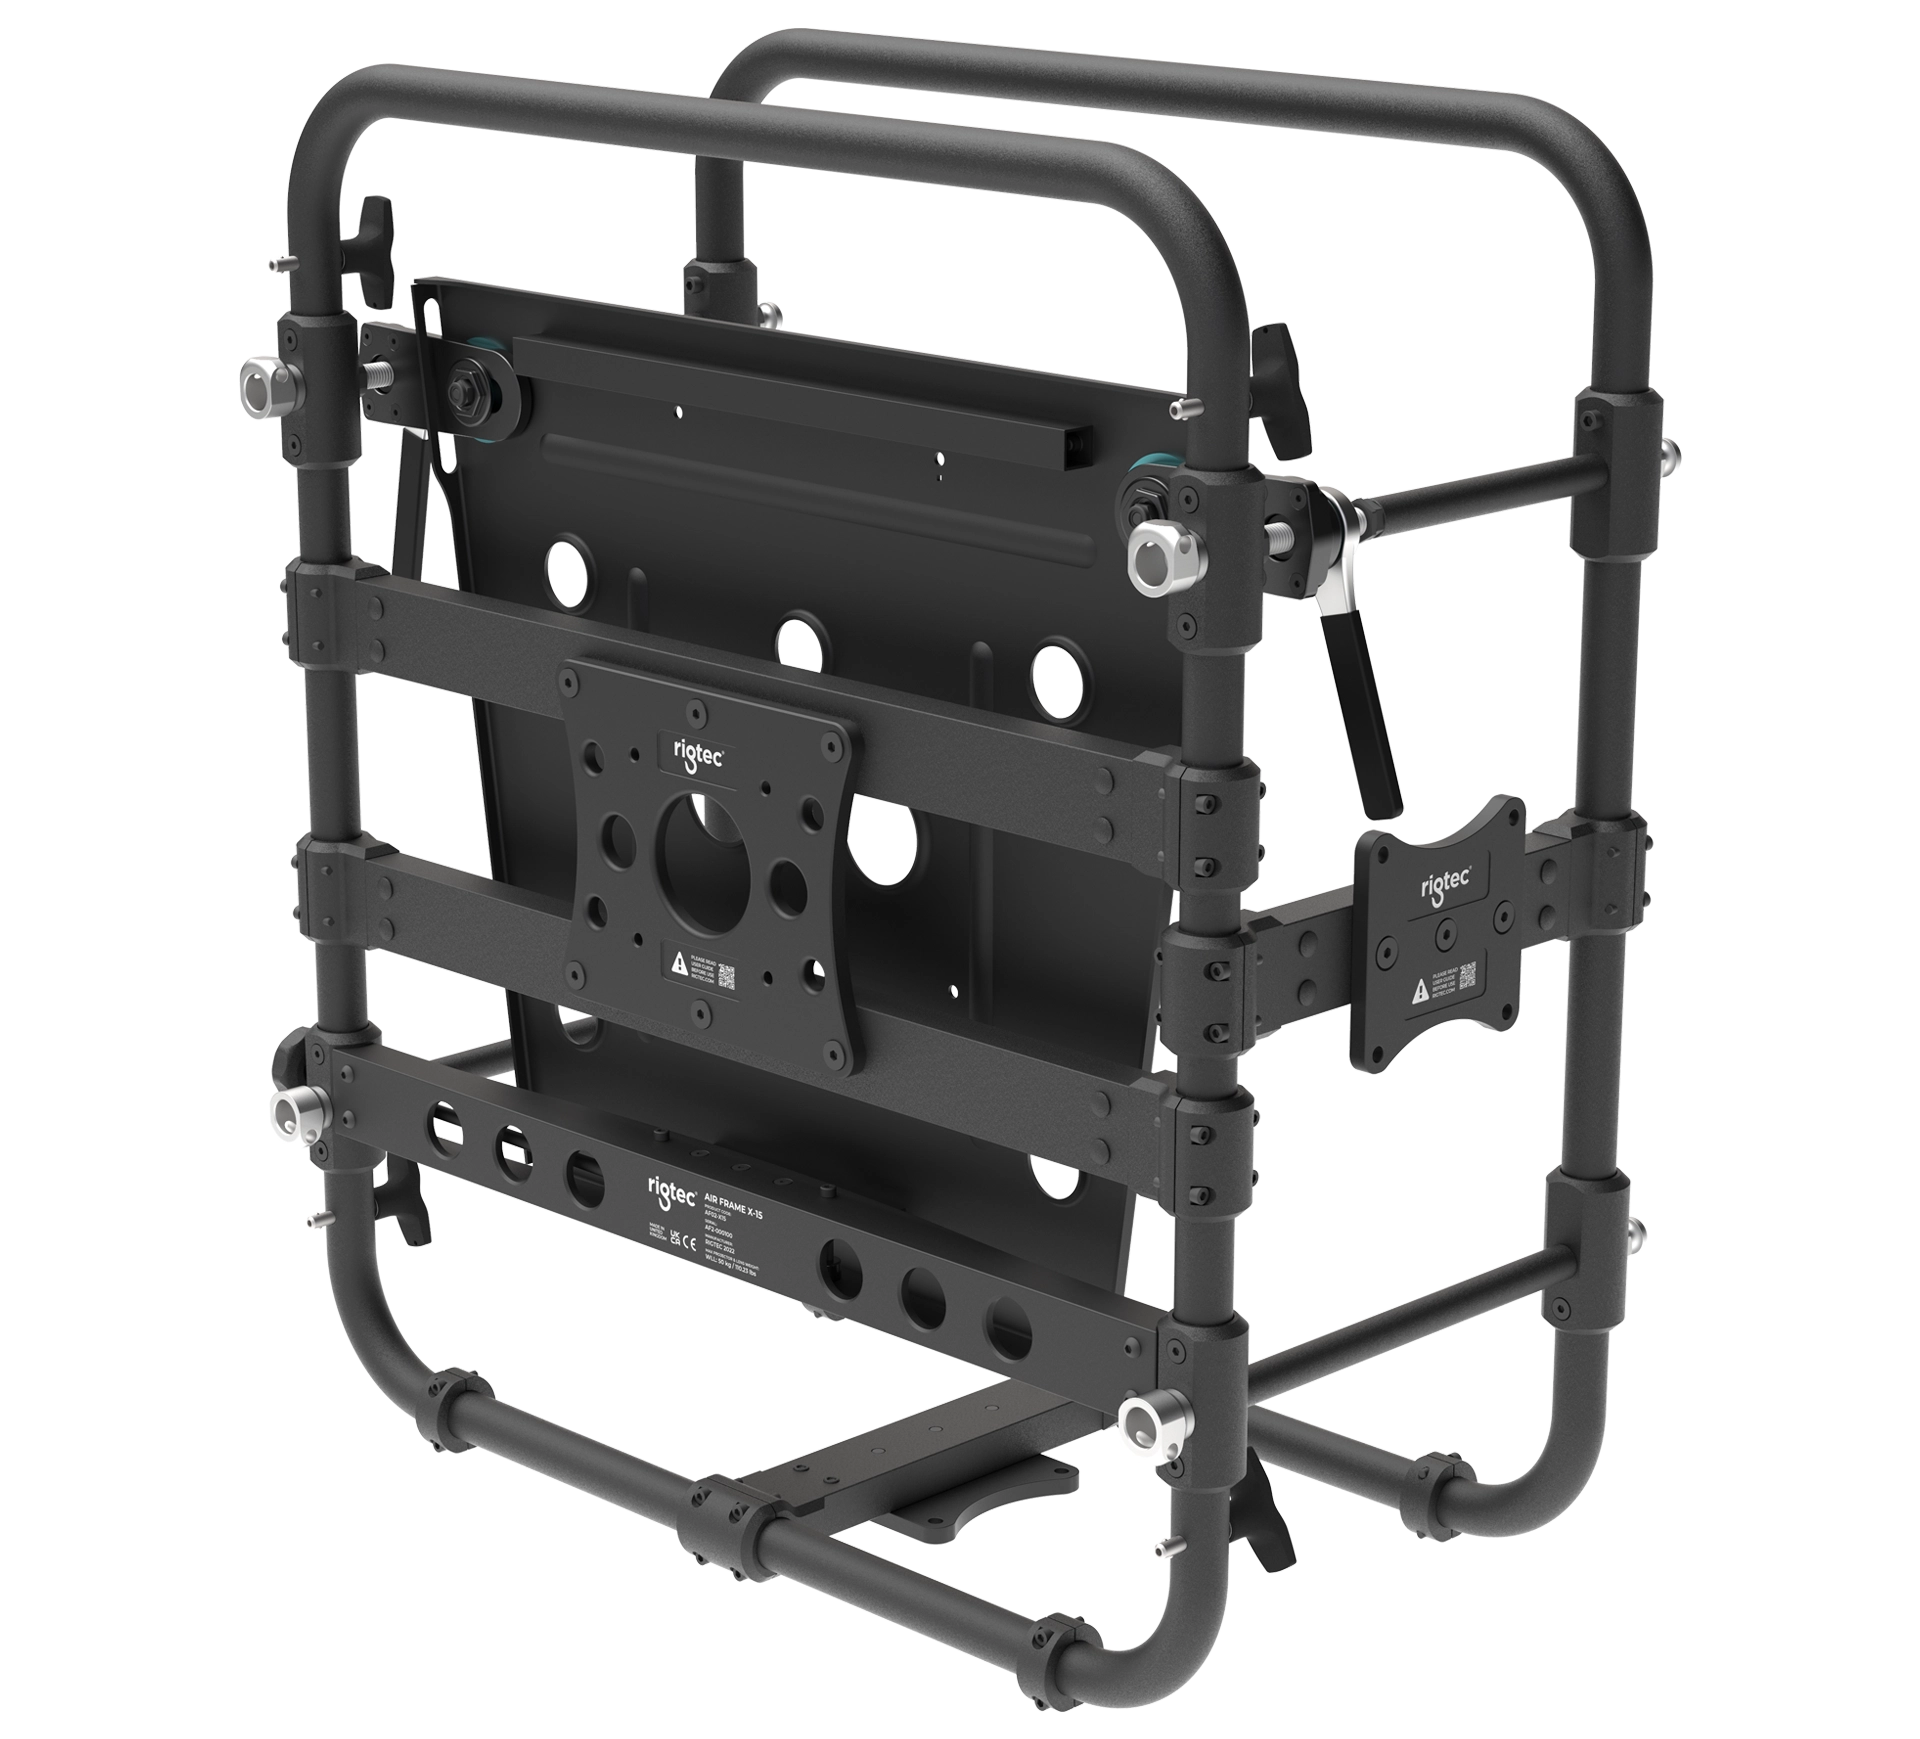 Rigtec Air Frame X15 Projector Rigging Frame in floor projection orientation